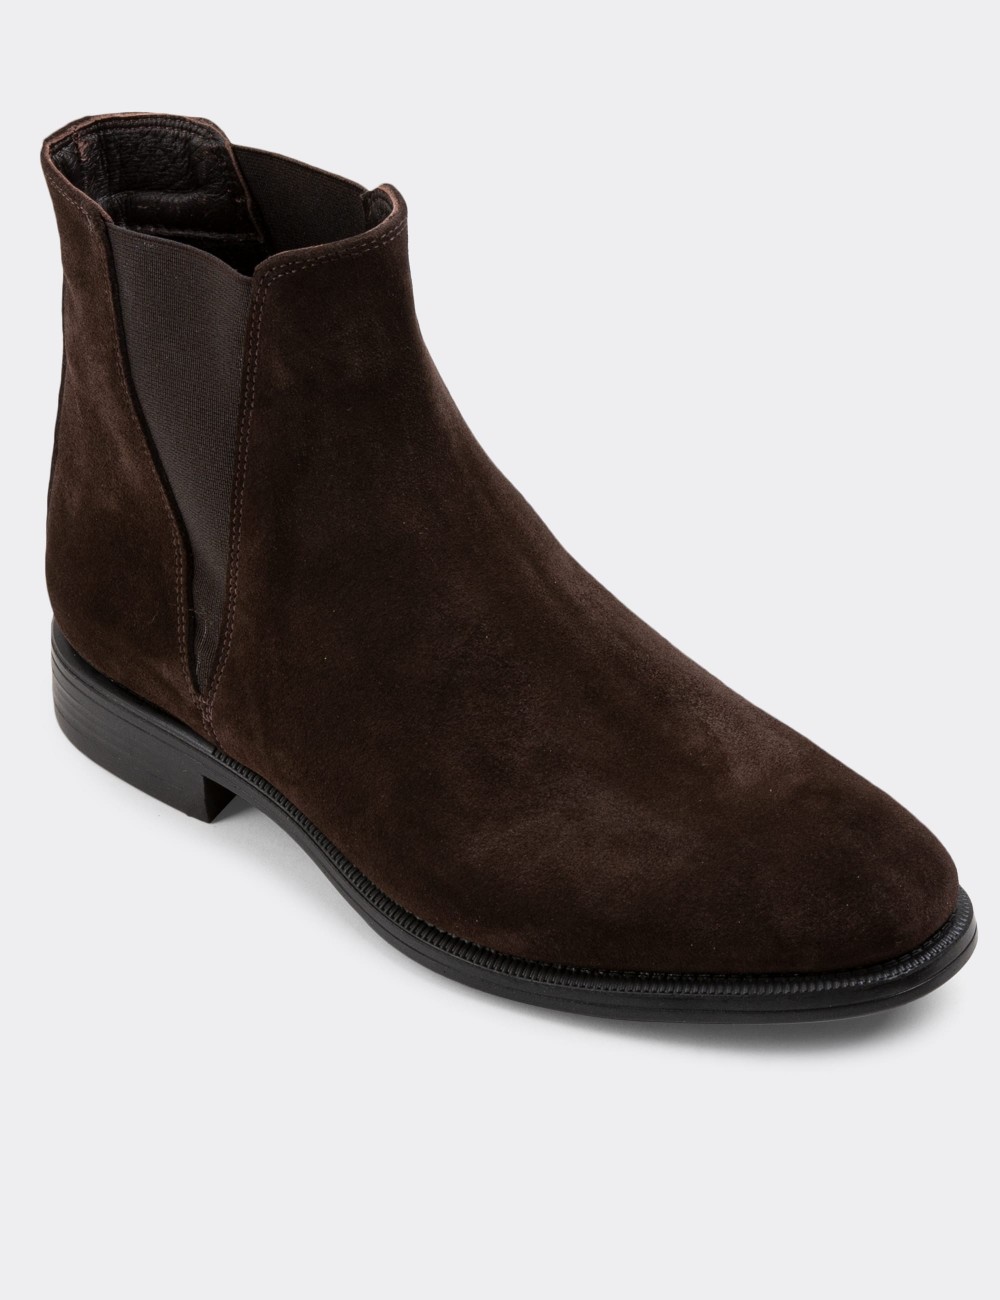 Brown Suede Leather Chelsea Boots - 01689MKHVC02